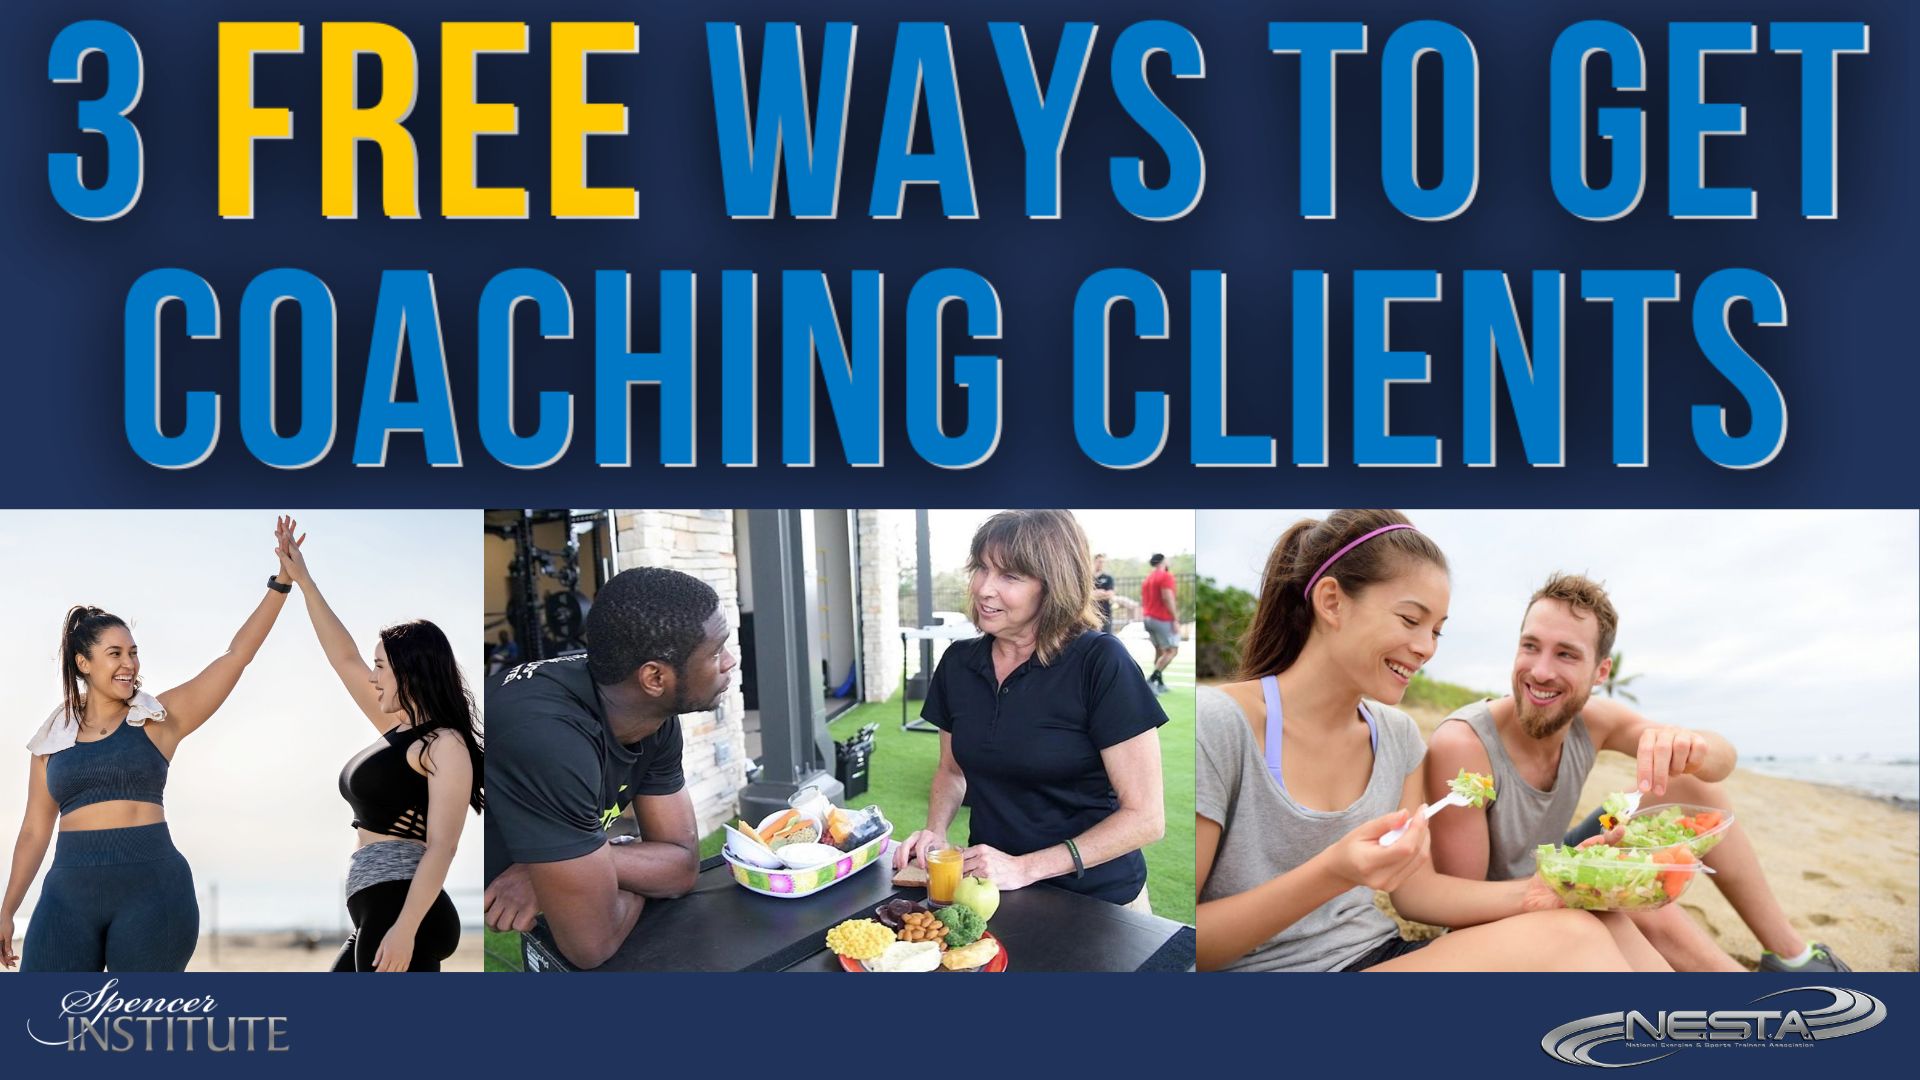 best free ways to get more clients for coaching business